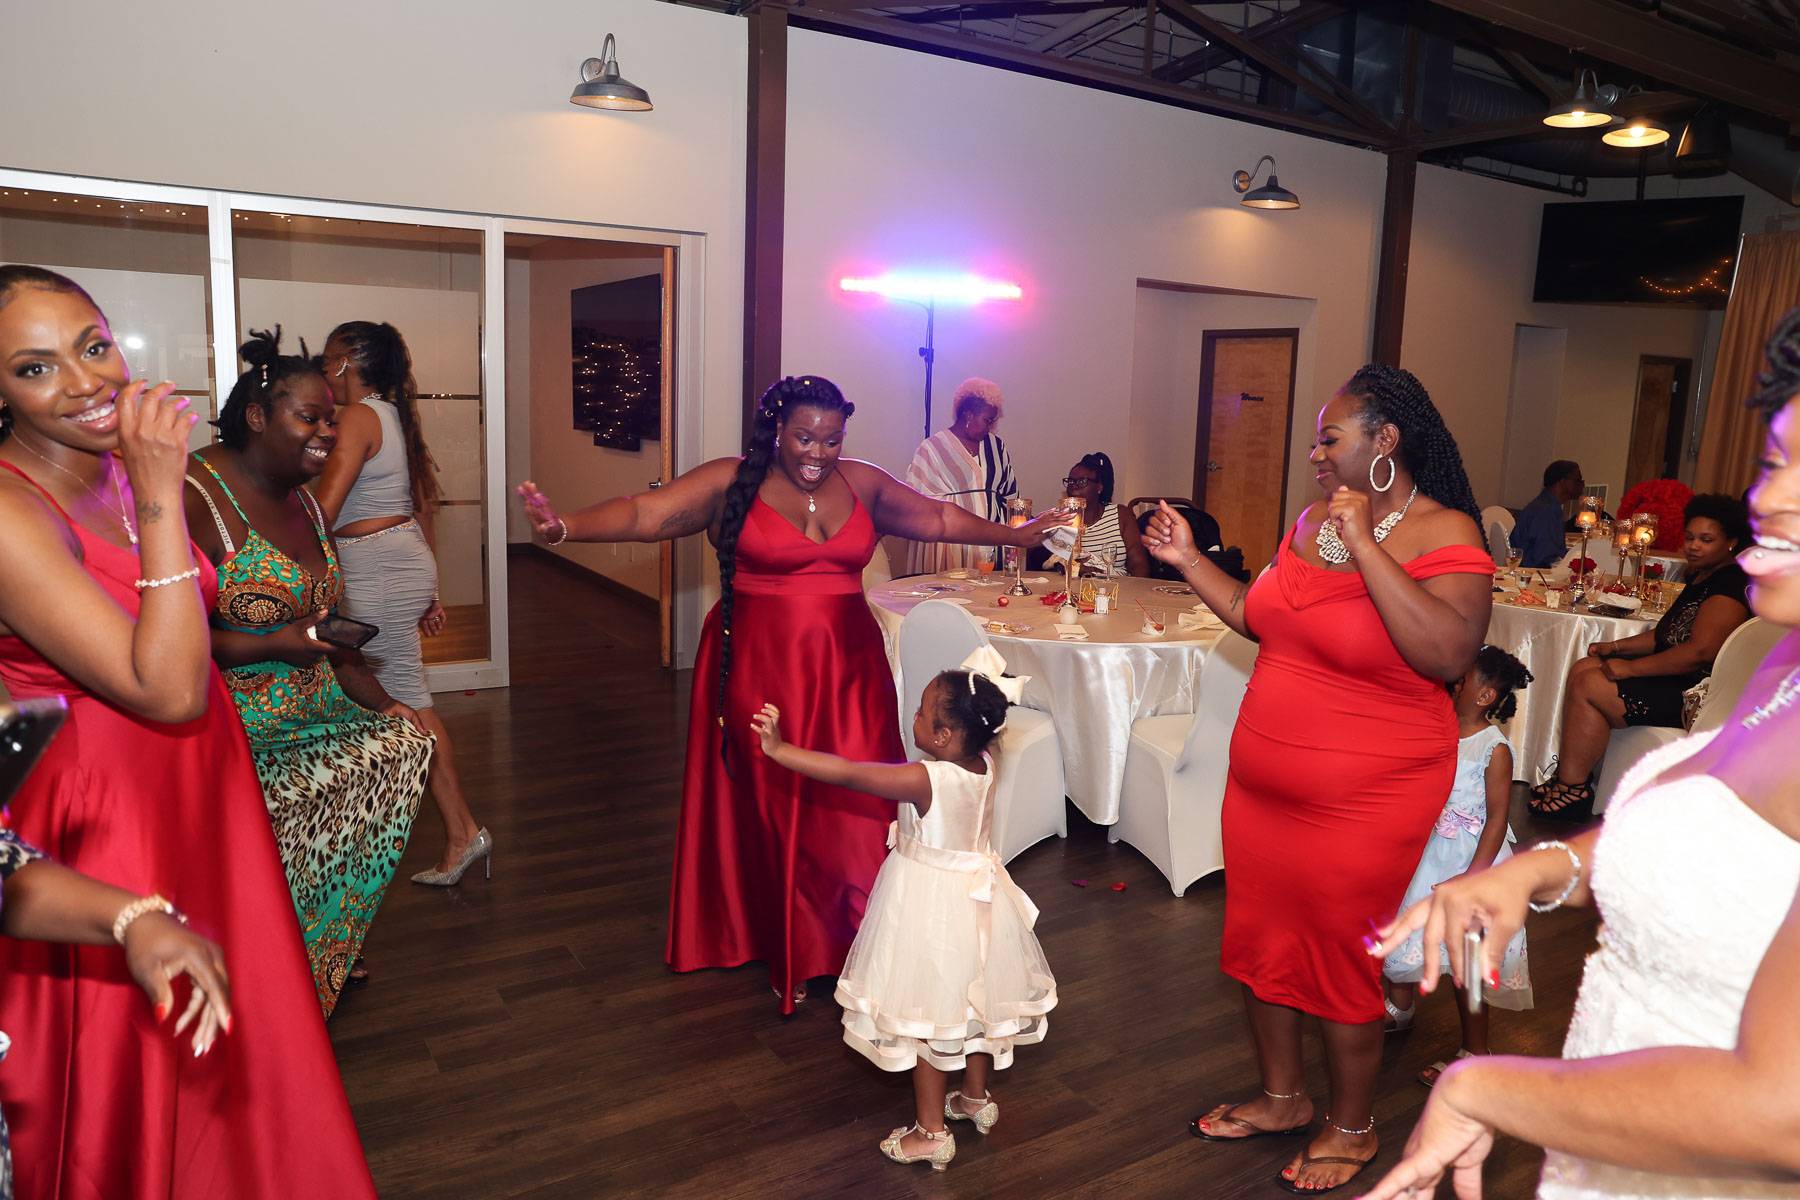 The bridesmaids dancing with the young girl